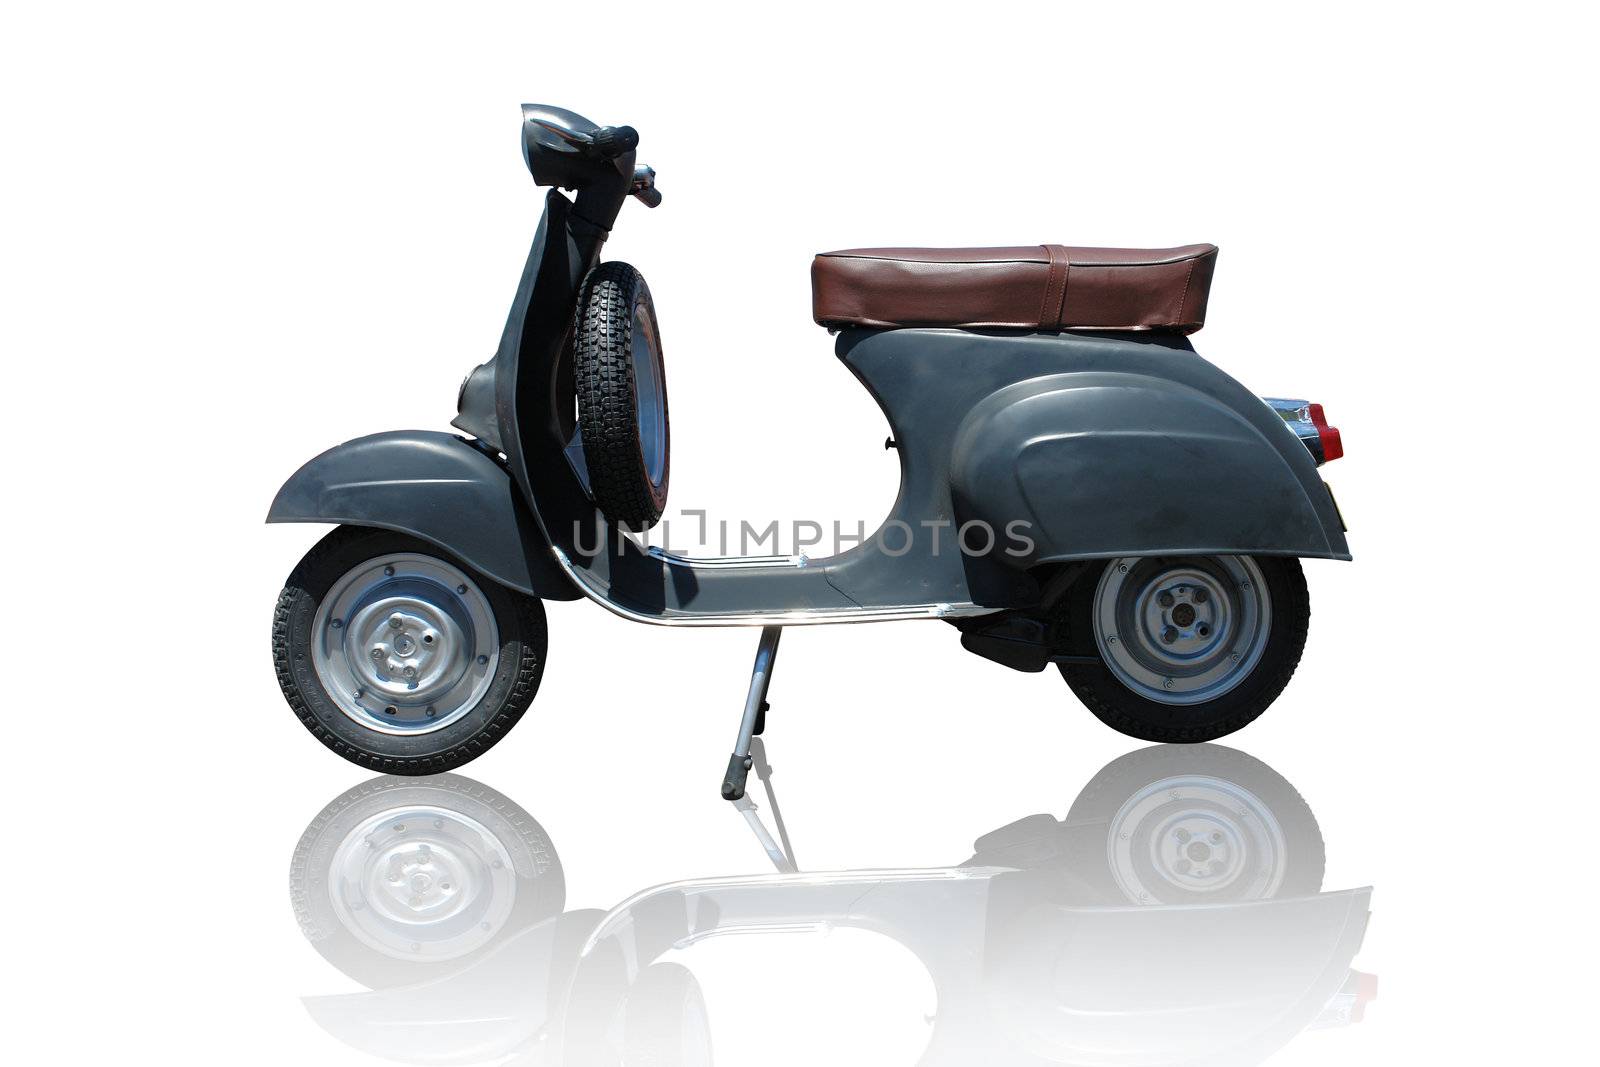 Vintage black vespa scooter. Vector path is included on file.                         